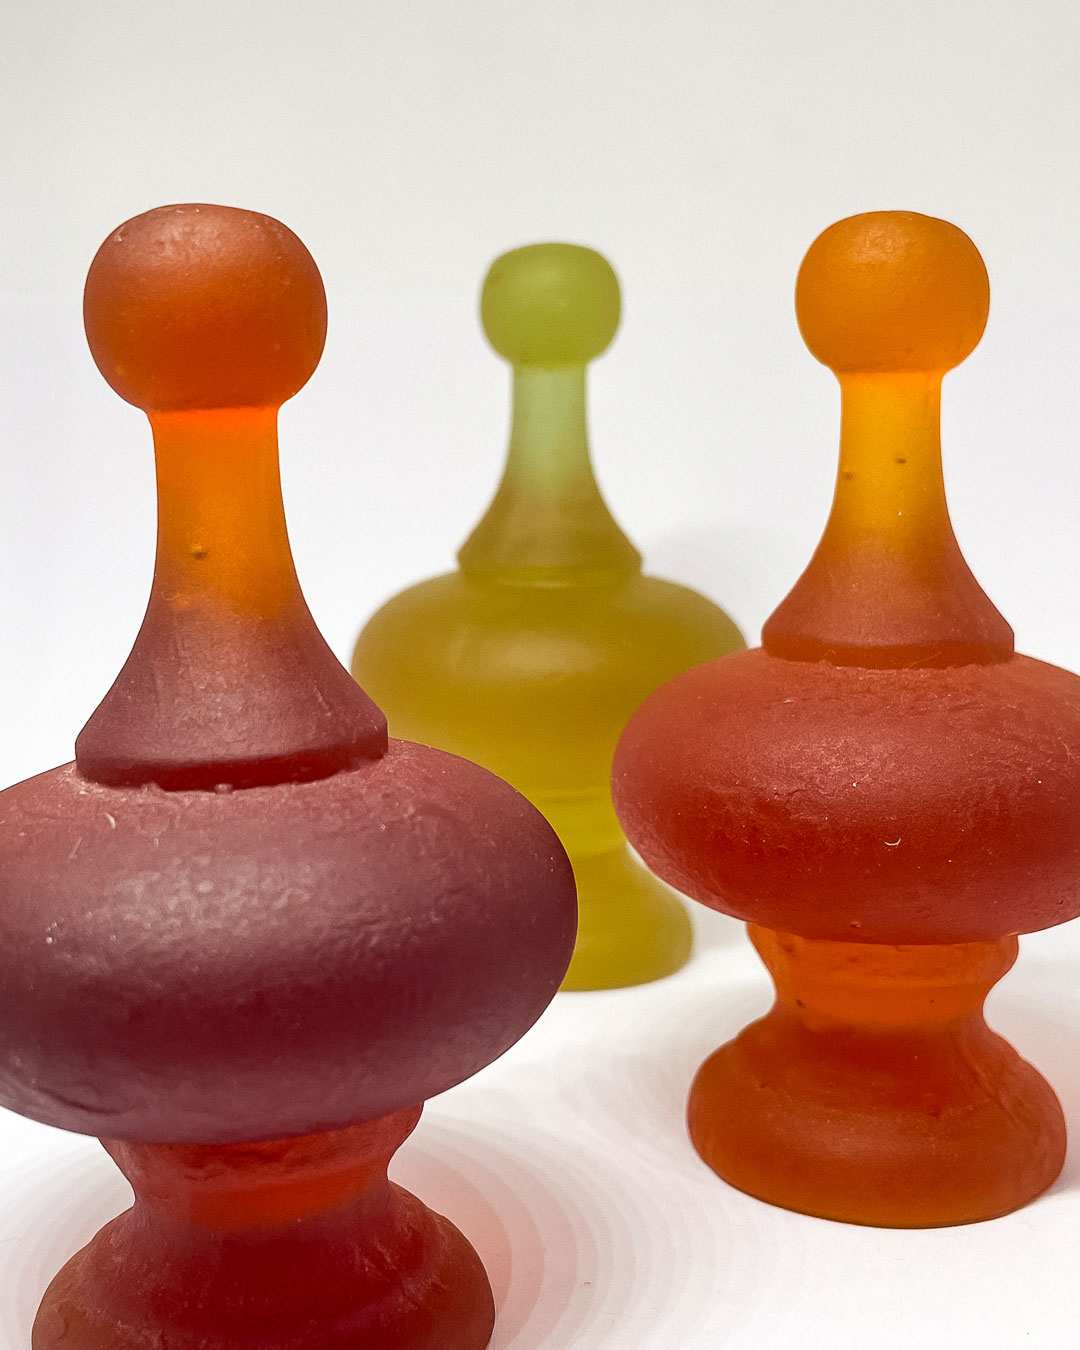 A close up of a group of three cast glass finials in Dark Orange, Orange and Rhubarb. They form wonderful light-filled installations in groups.